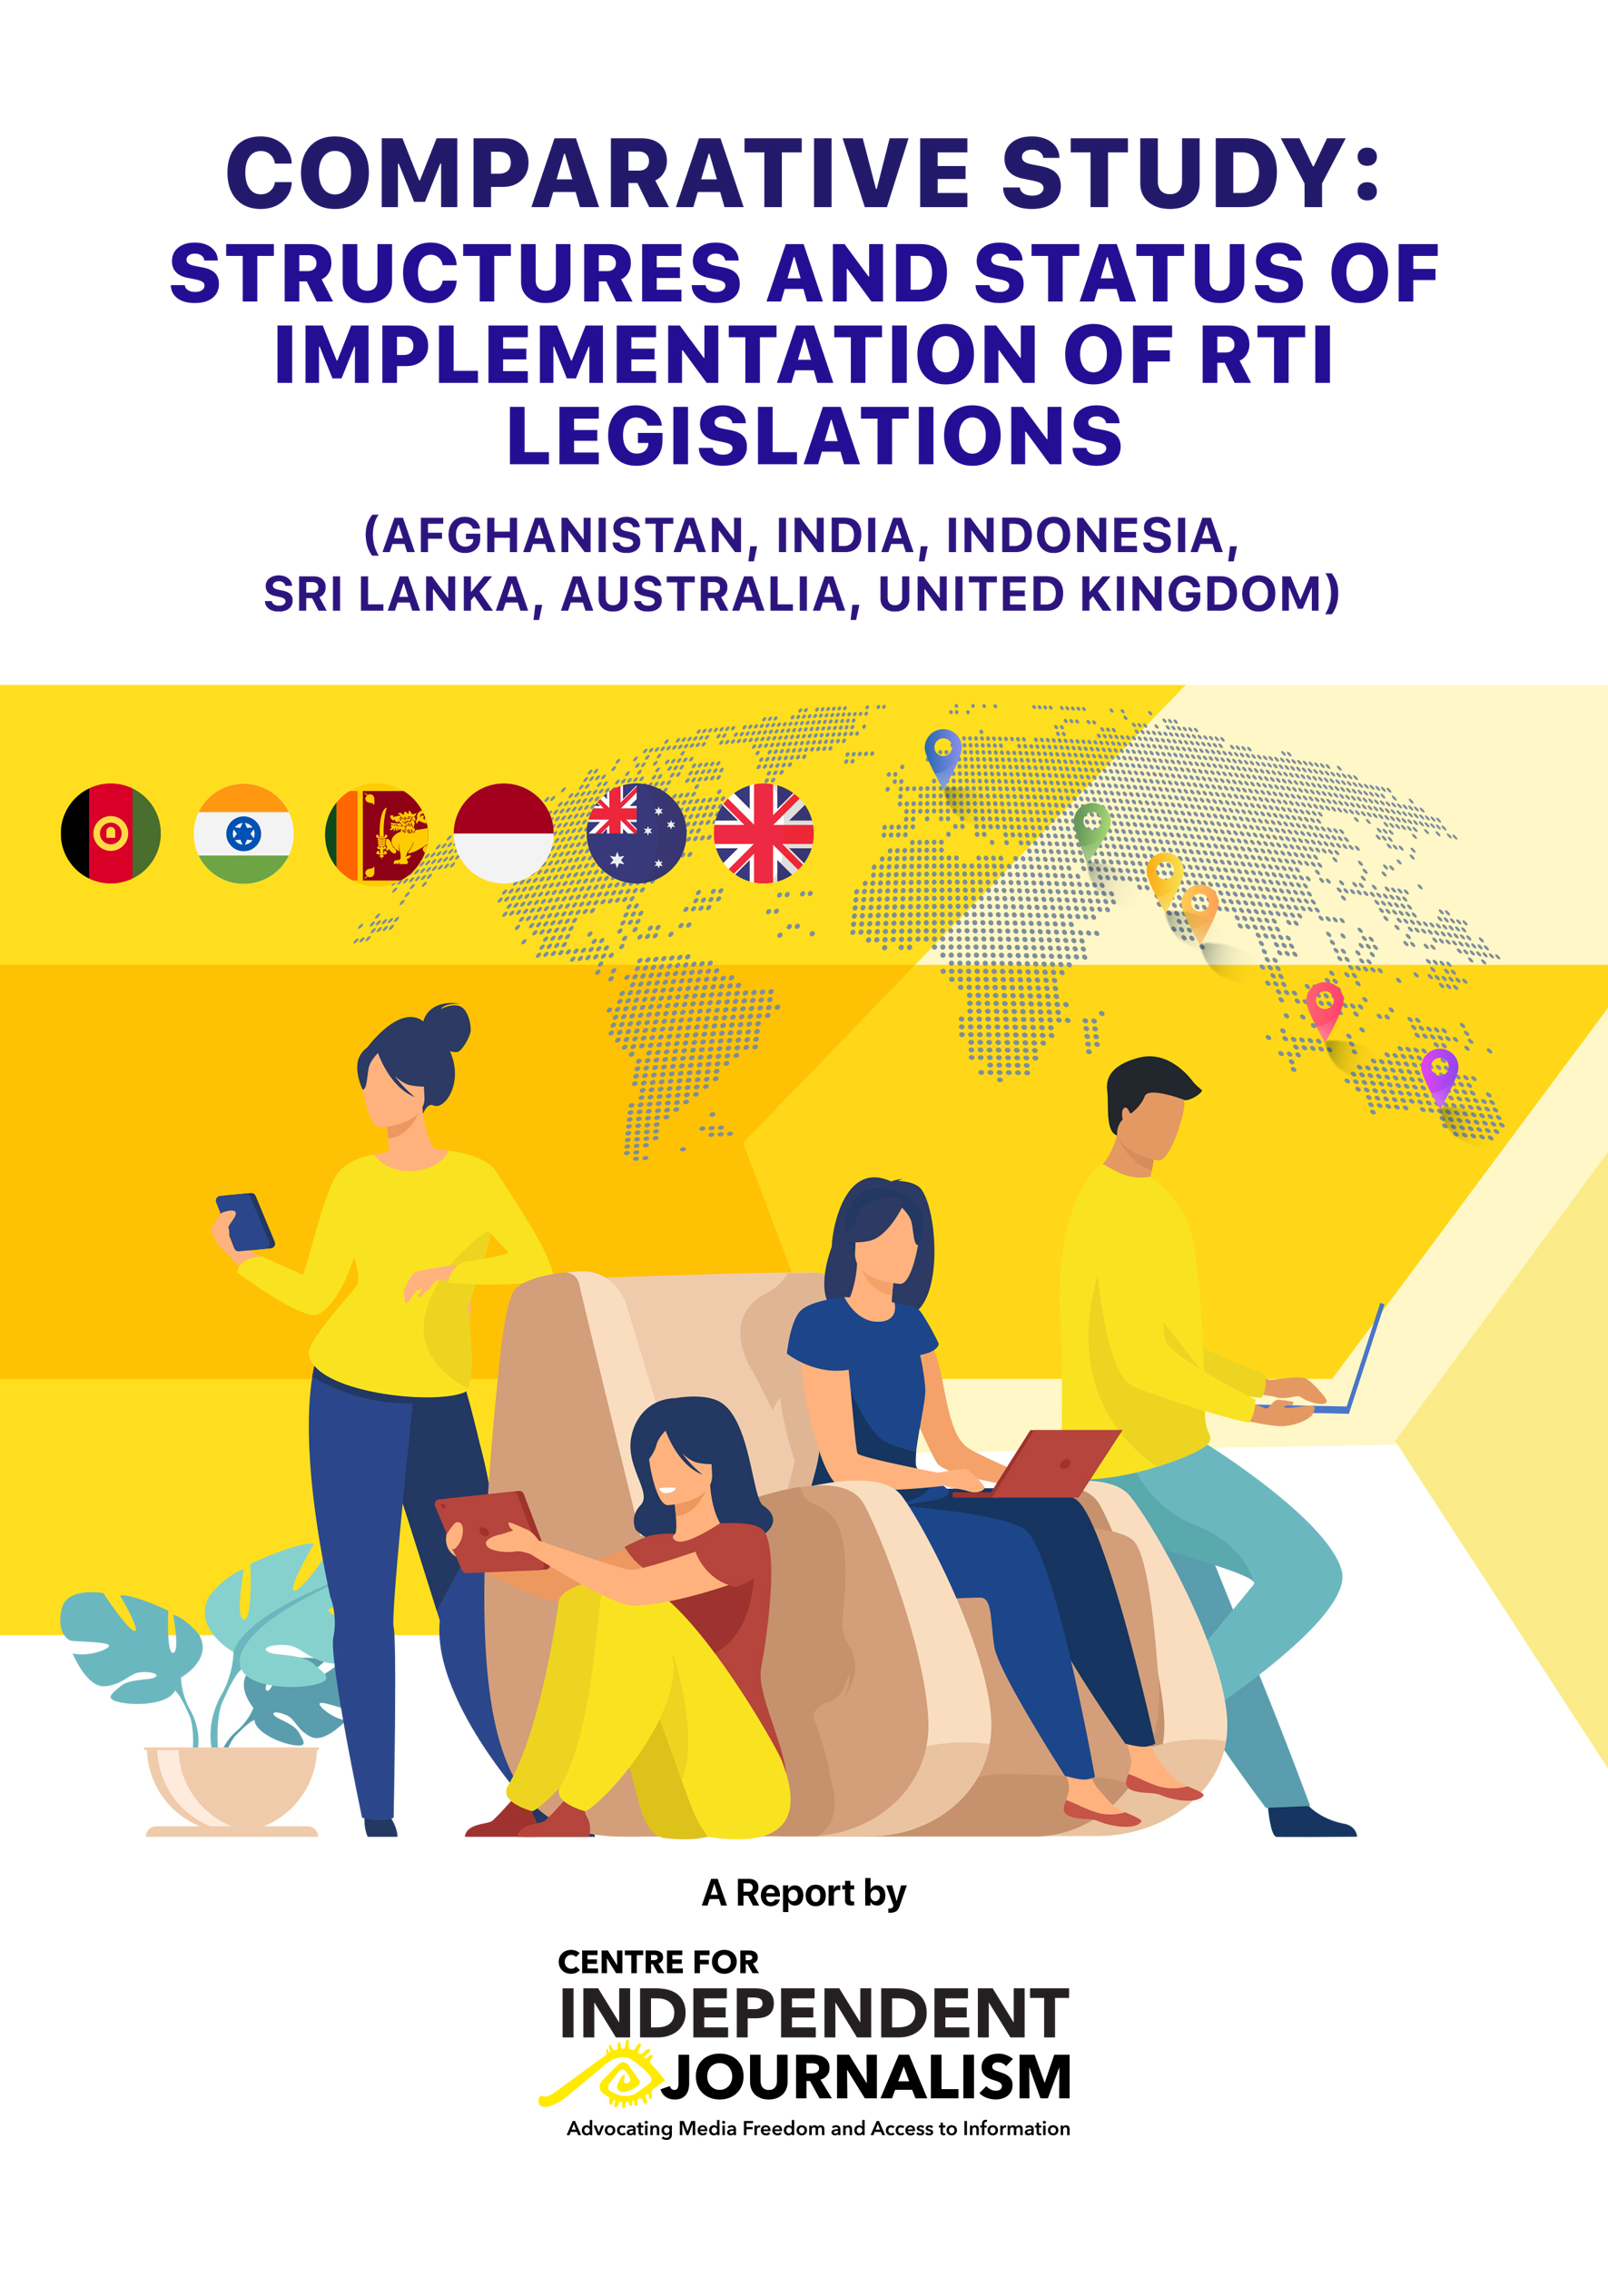 COMPARATIVE STUDY: STRUCTURES AND STATUS OF IMPLEMENTATION OF RTI LEGISLATIONS